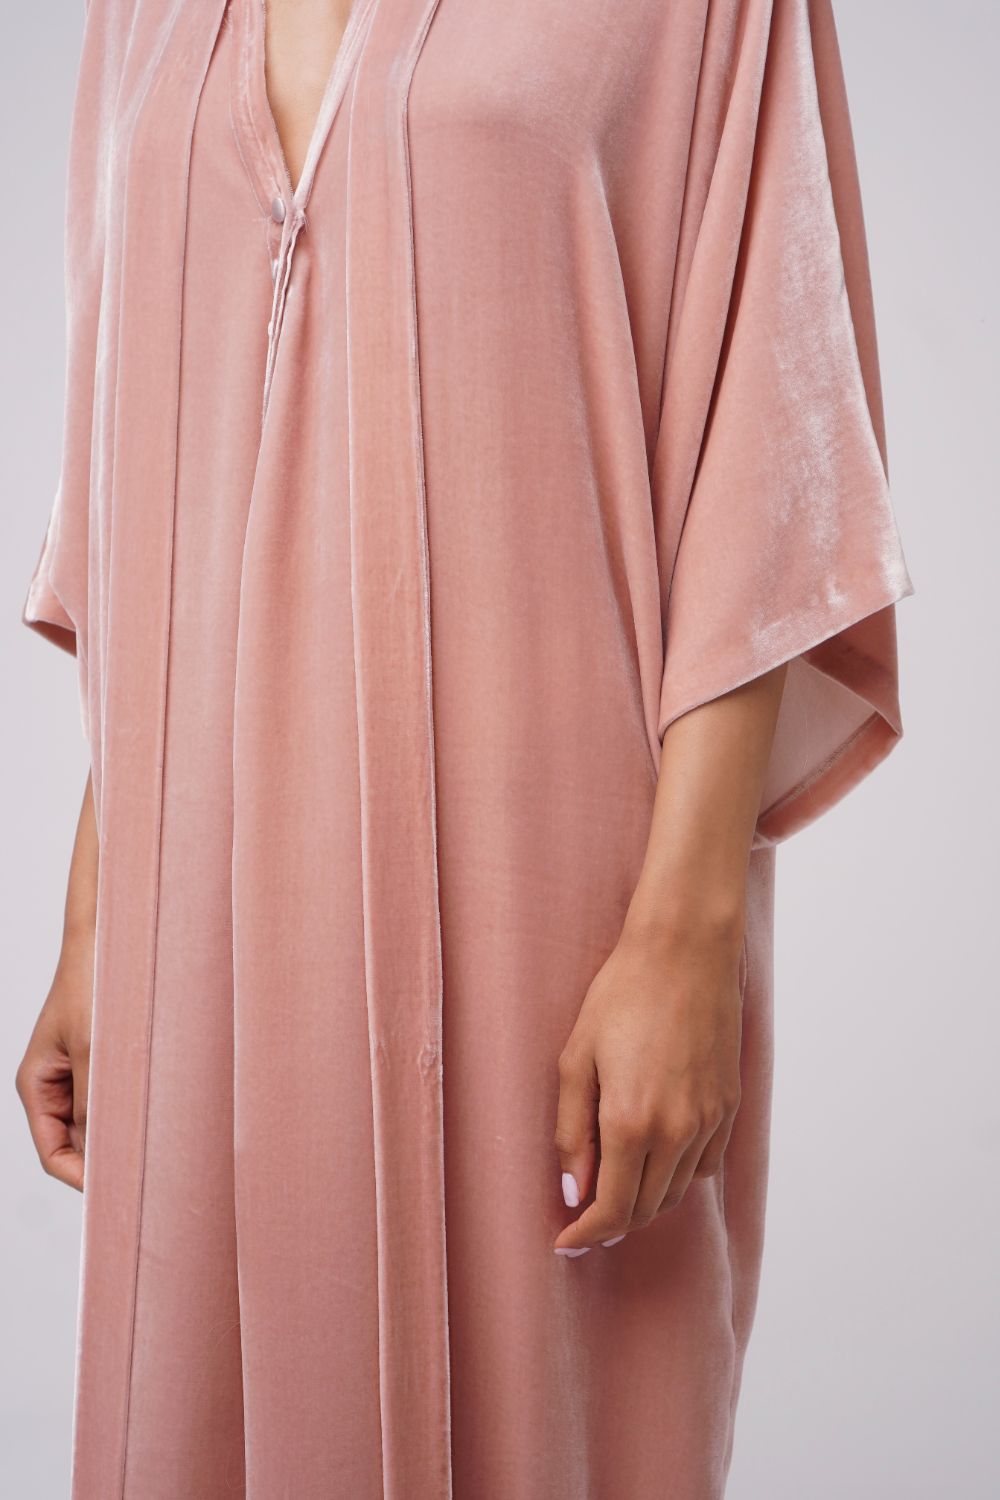  Feel The Light Robe Light Pink Product SIA Glamoralle